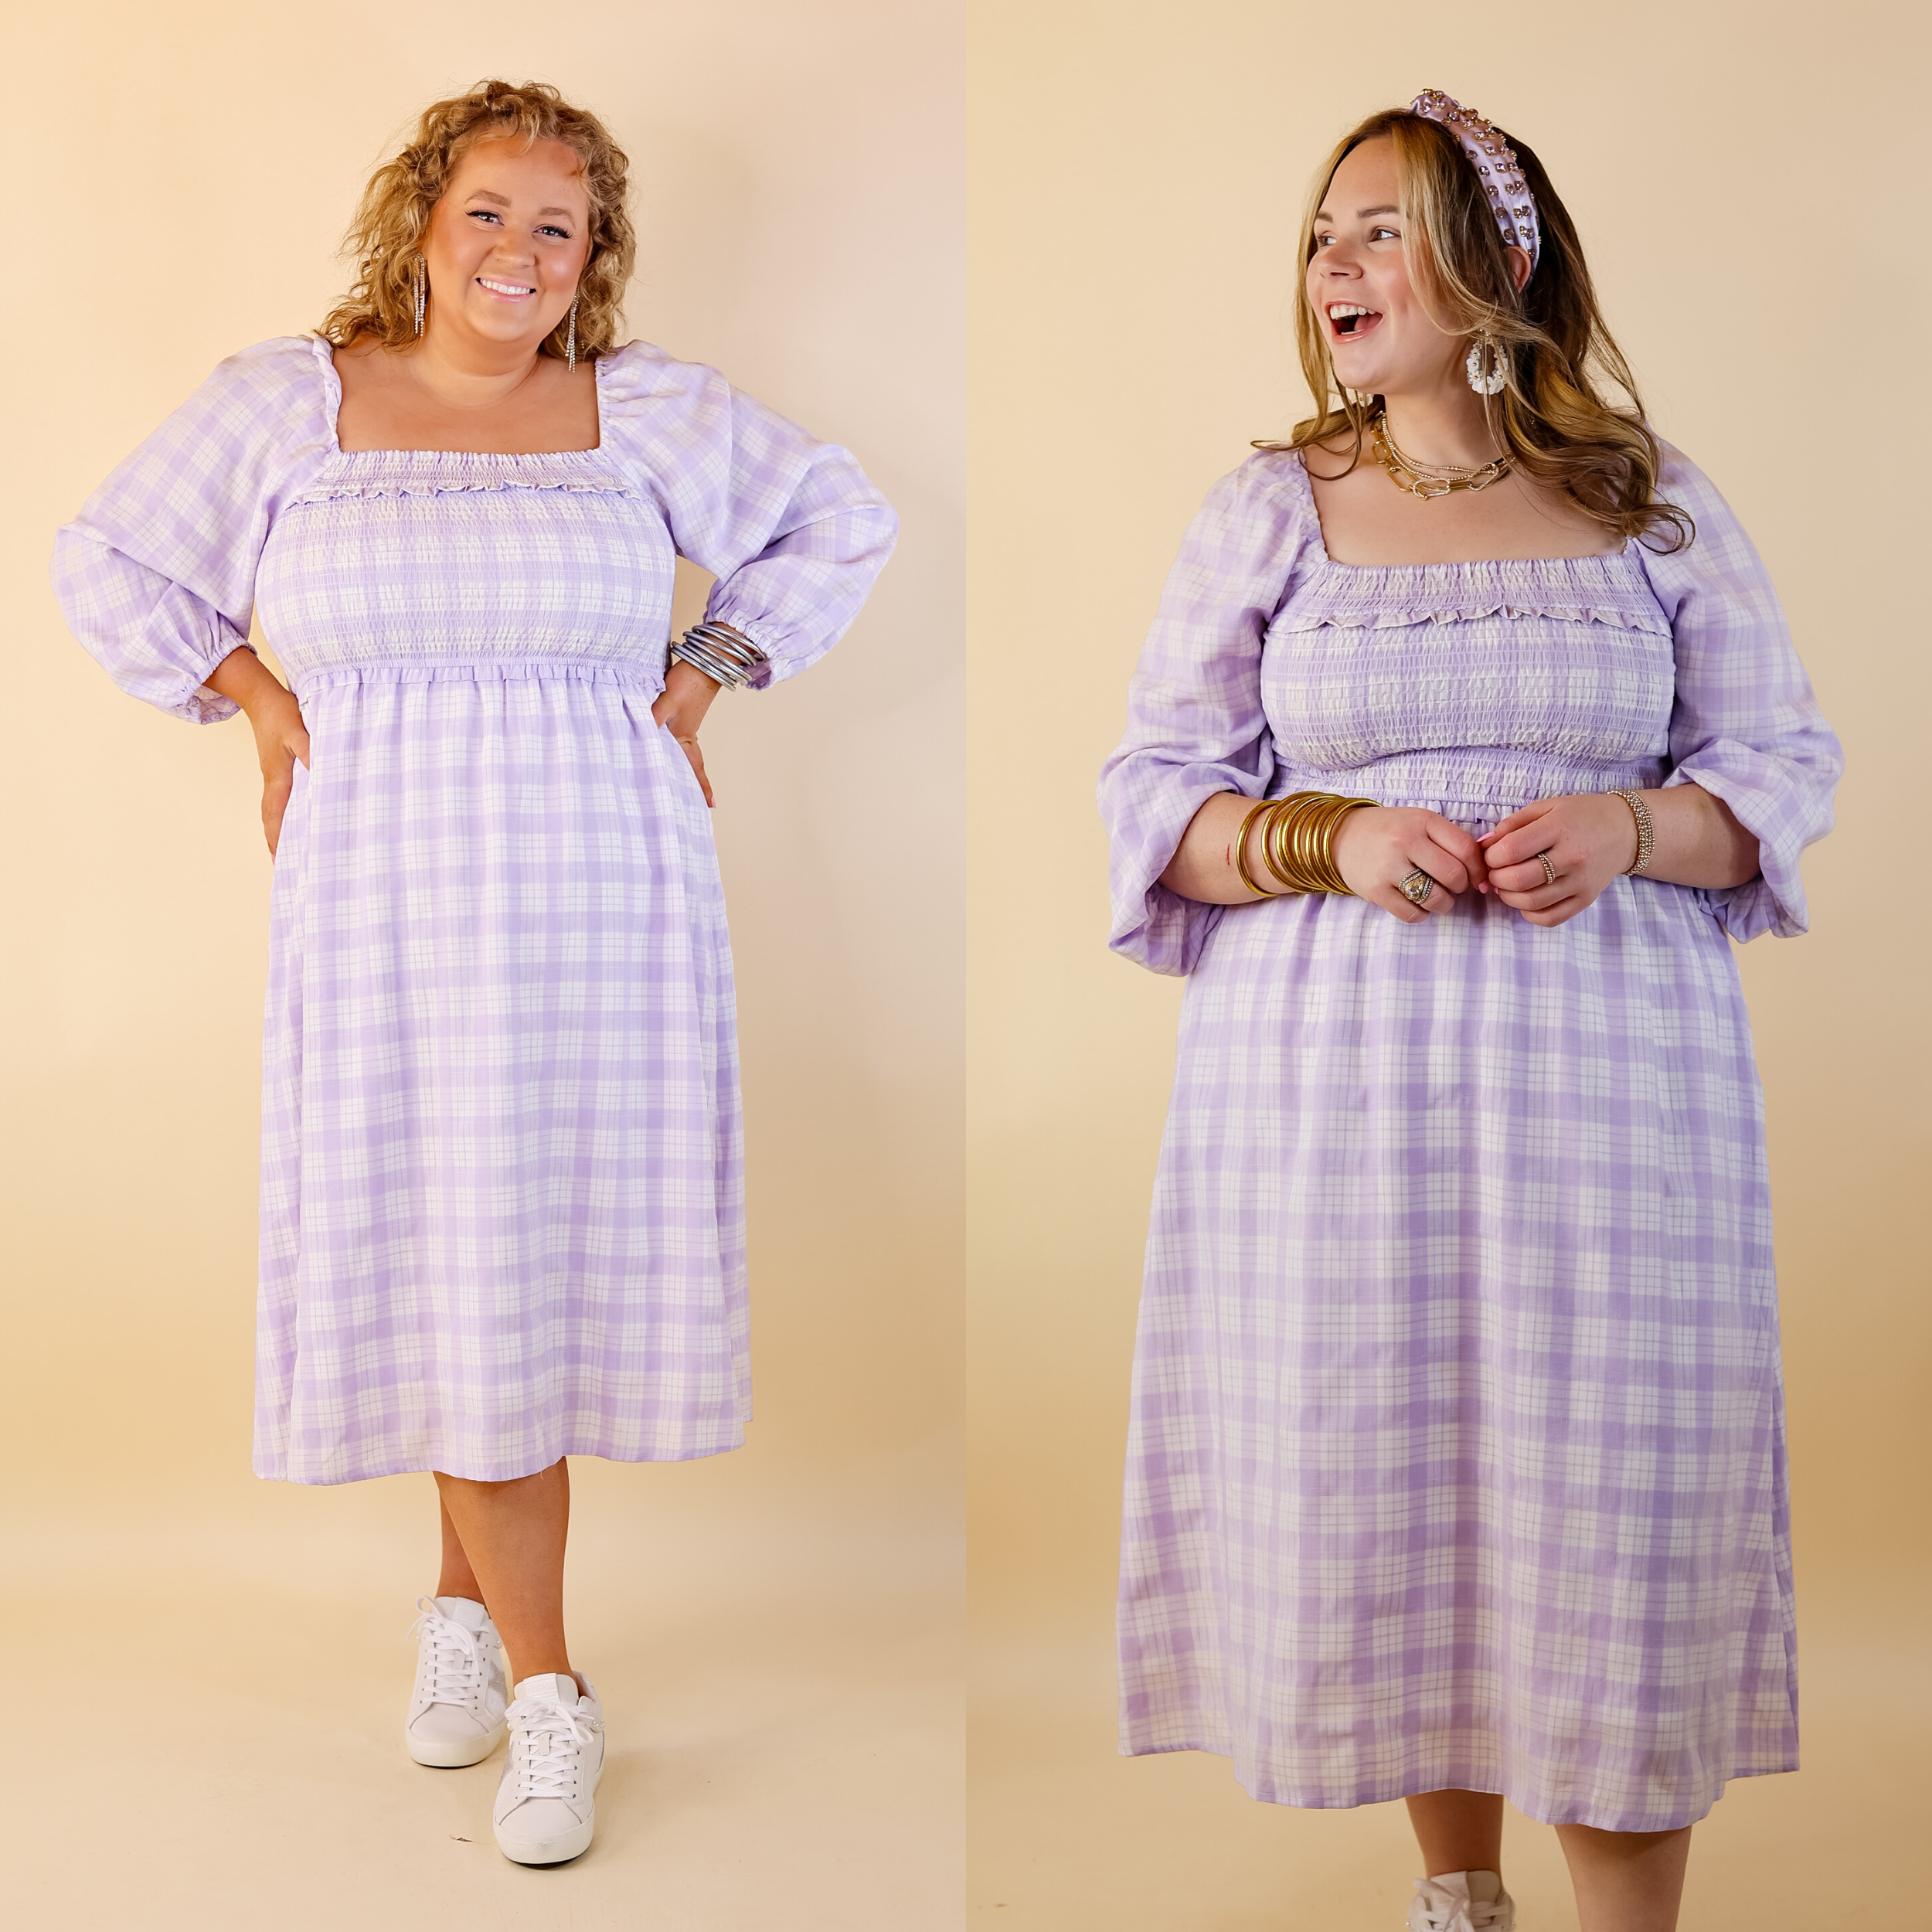 Adorable Impression Plaid Midi Dress with Smocked Bodice in Lavender Purple - Giddy Up Glamour Boutique